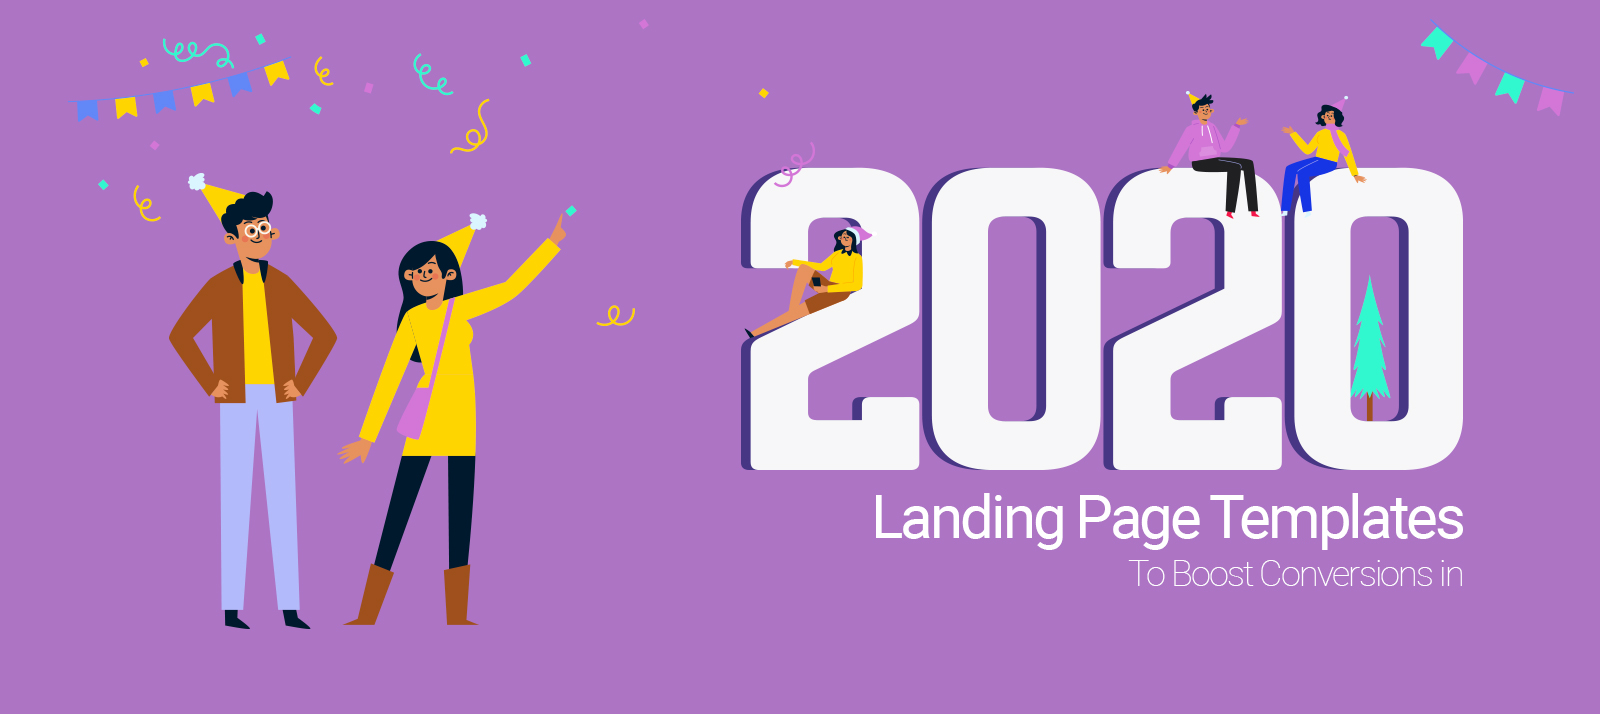  Bootstrap App Landing Page Templates To Boost Conversions in 2020